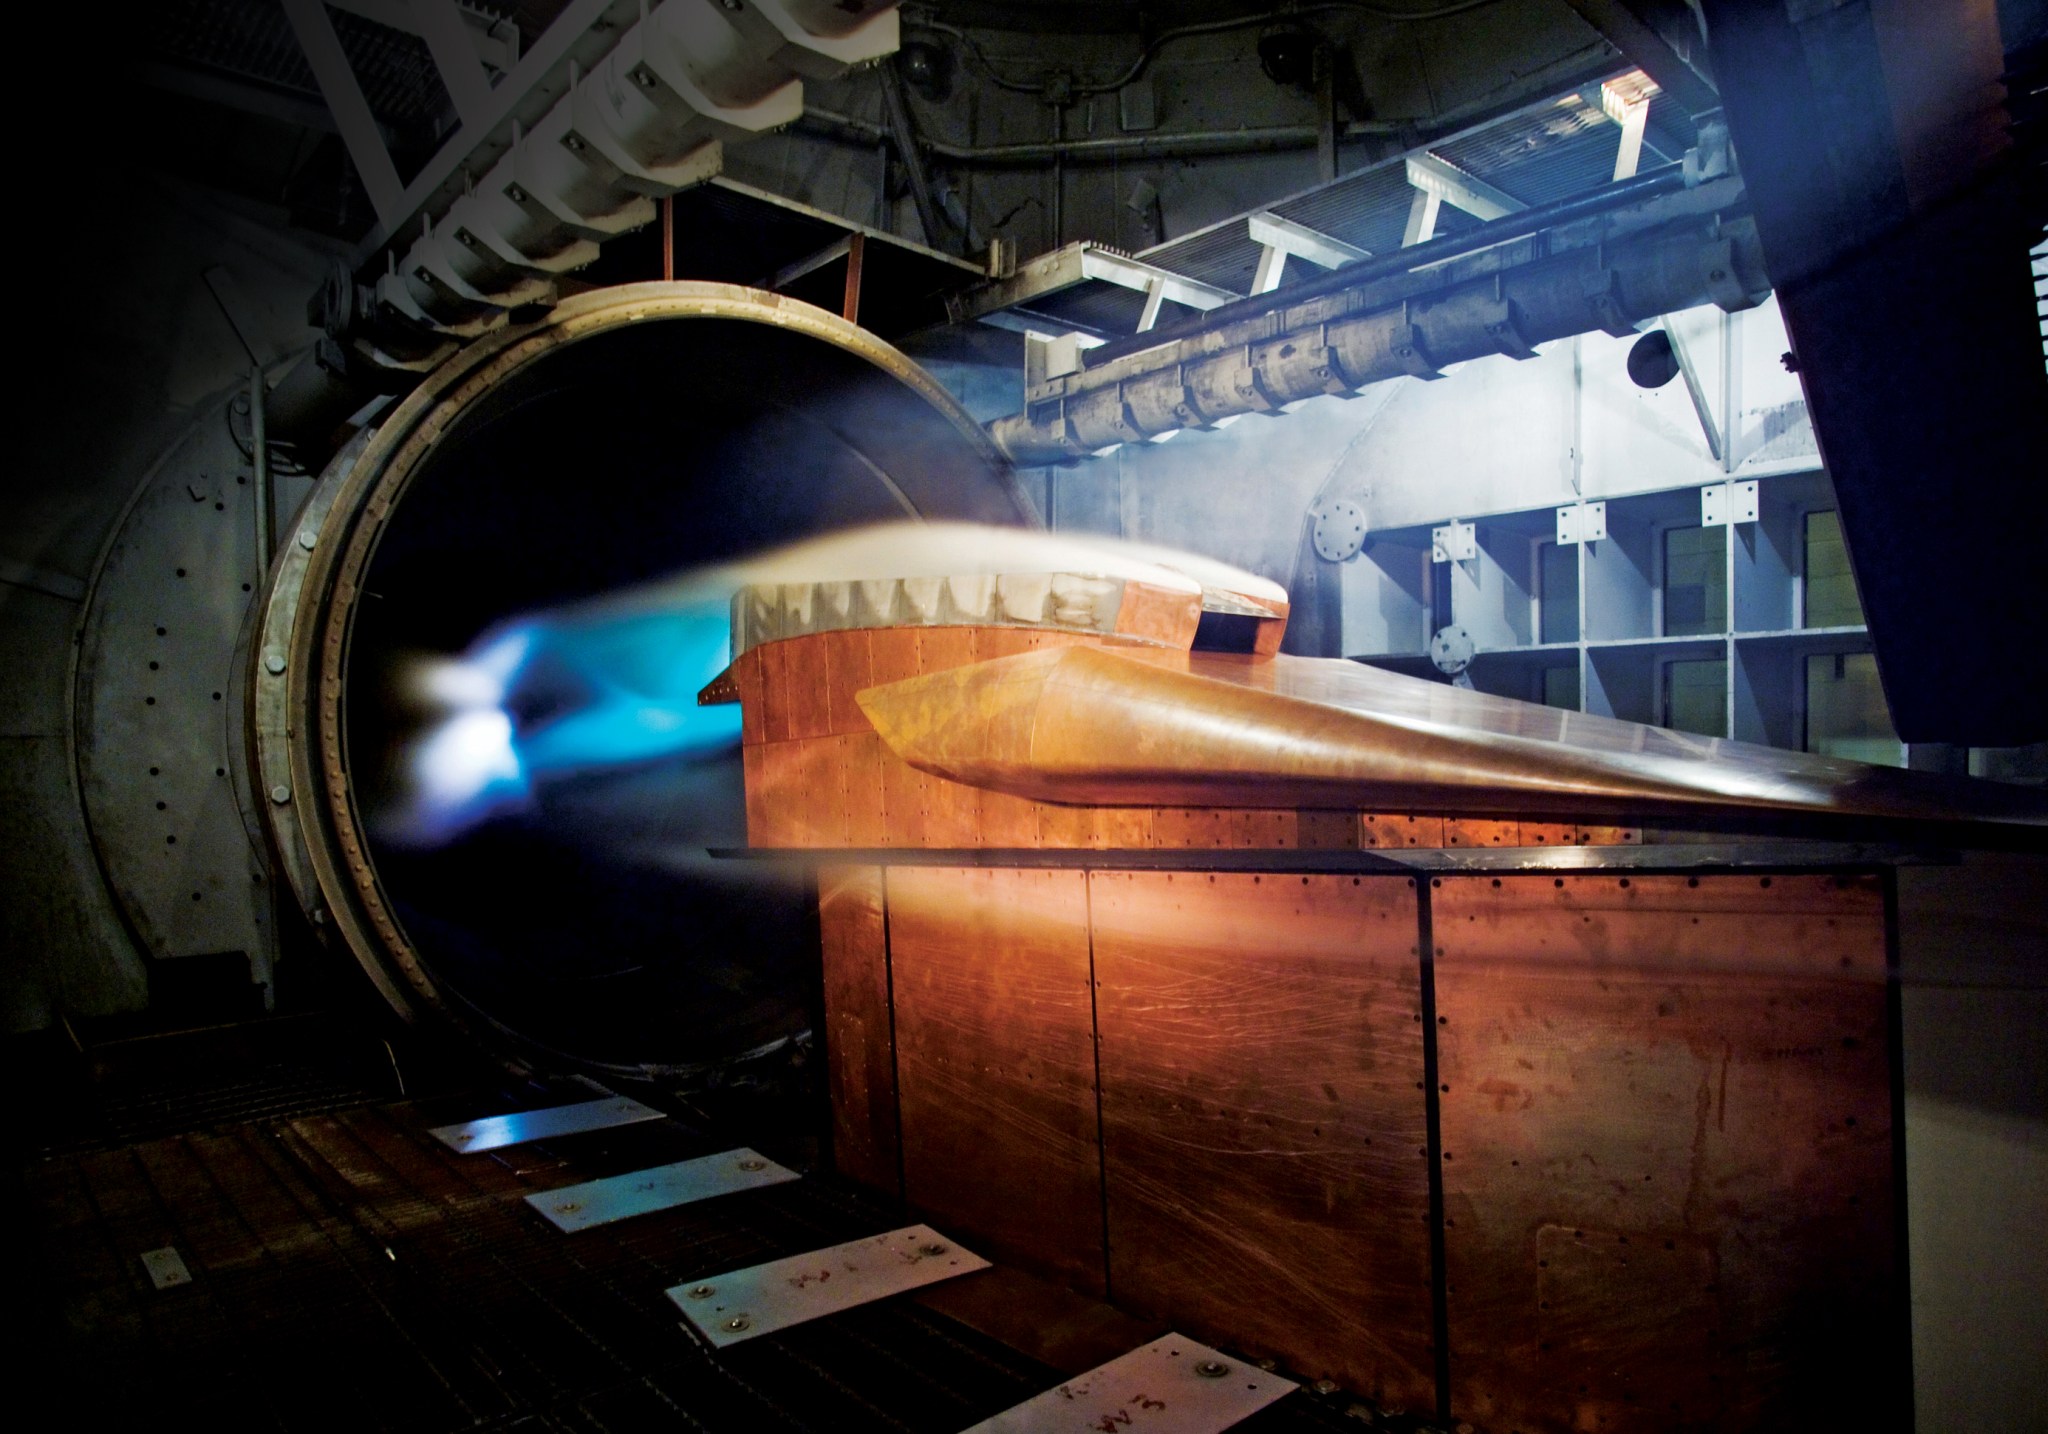 This is a photo of the U.S. Air Force's Ground Demonstration Engine, known as GDE-2, at the NASA Langley's 8 ft high-temperature tunnel.